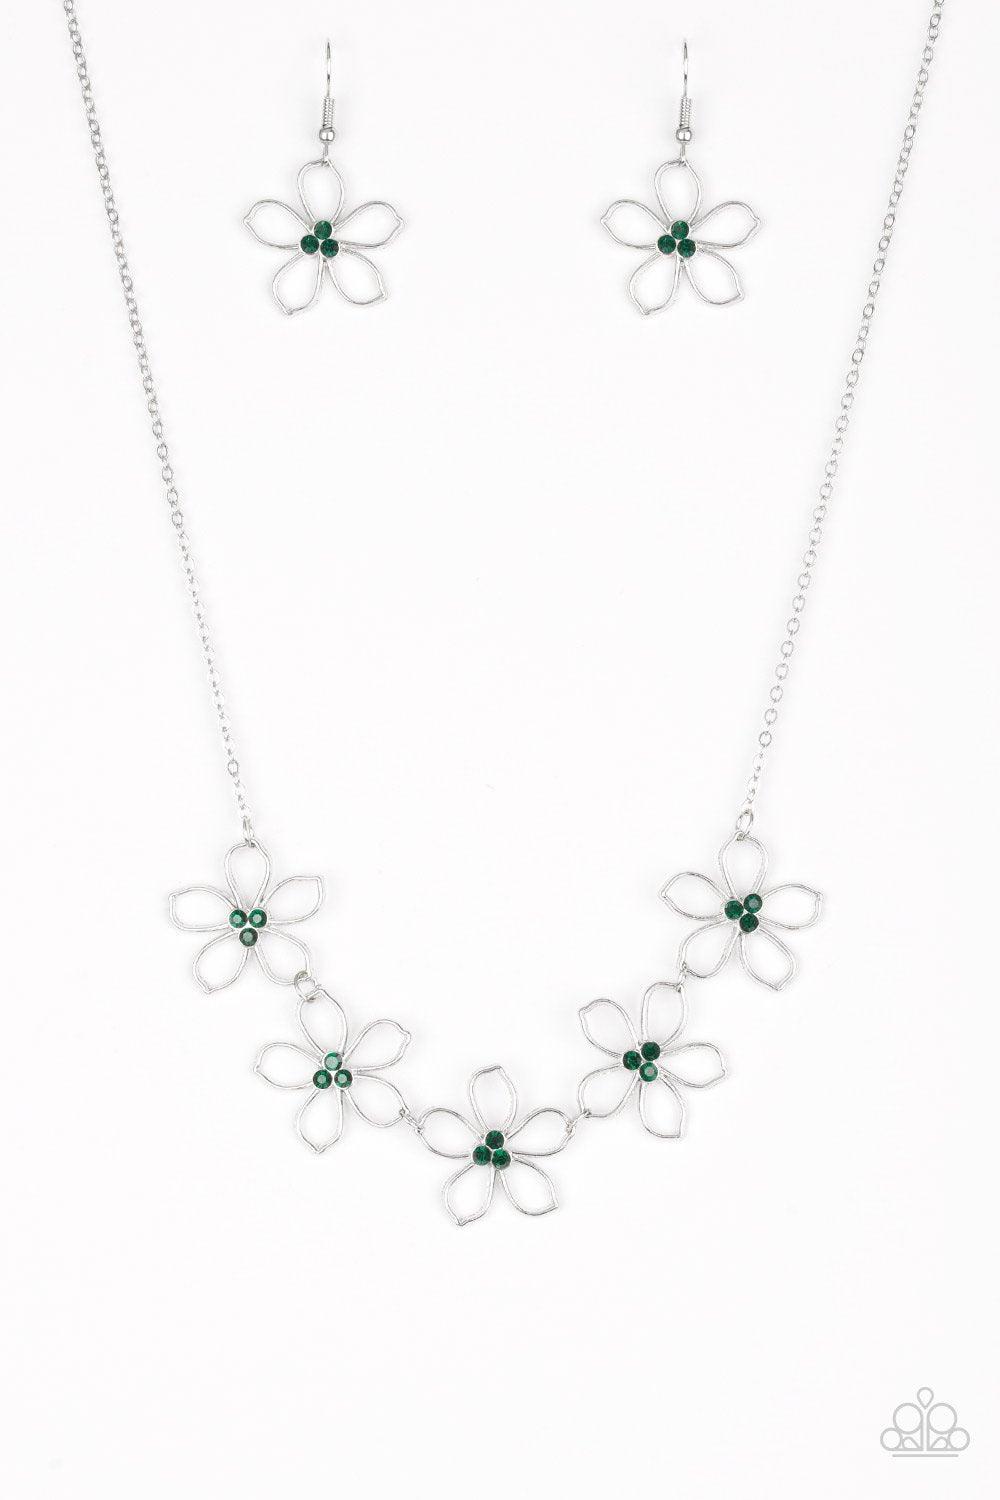 Hoppin Hibiscus Green Flower Necklace and matching Earrings - Paparazzi Accessories-CarasShop.com - $5 Jewelry by Cara Jewels